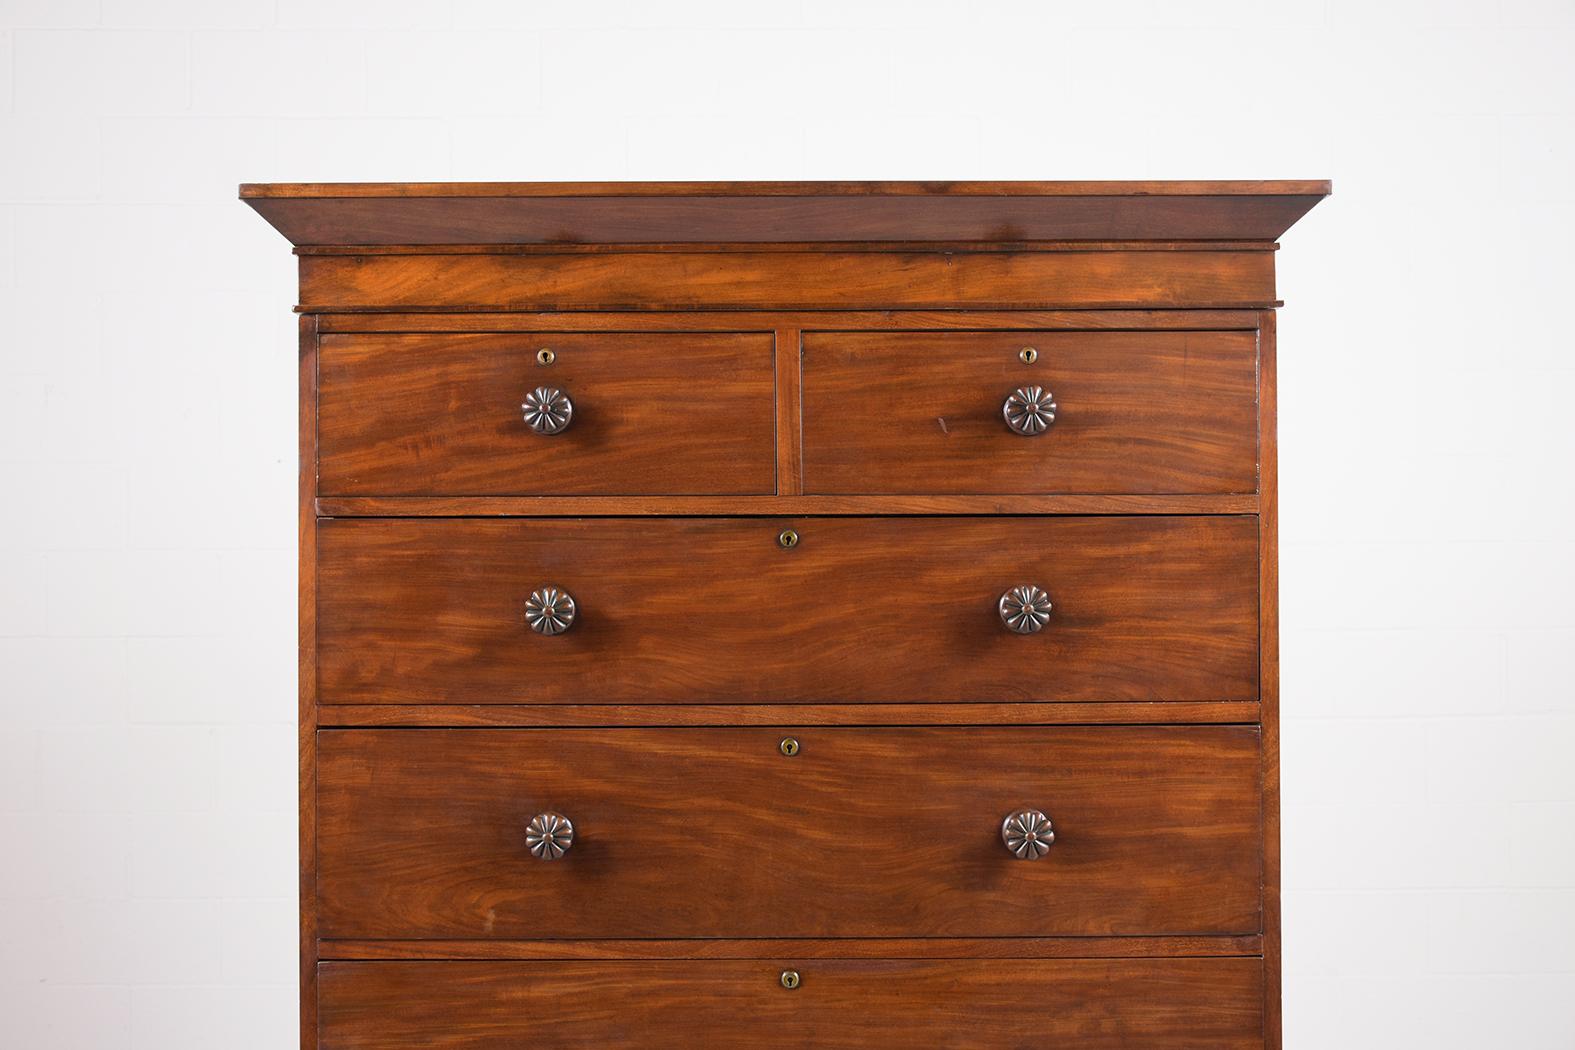 Step back in time with our exquisite 19th-century tall chest of drawers, which has been skillfully restored to its former glory by our dedicated team of craftsmen. Made from rich mahogany wood, this antique dresser radiates with its original dark